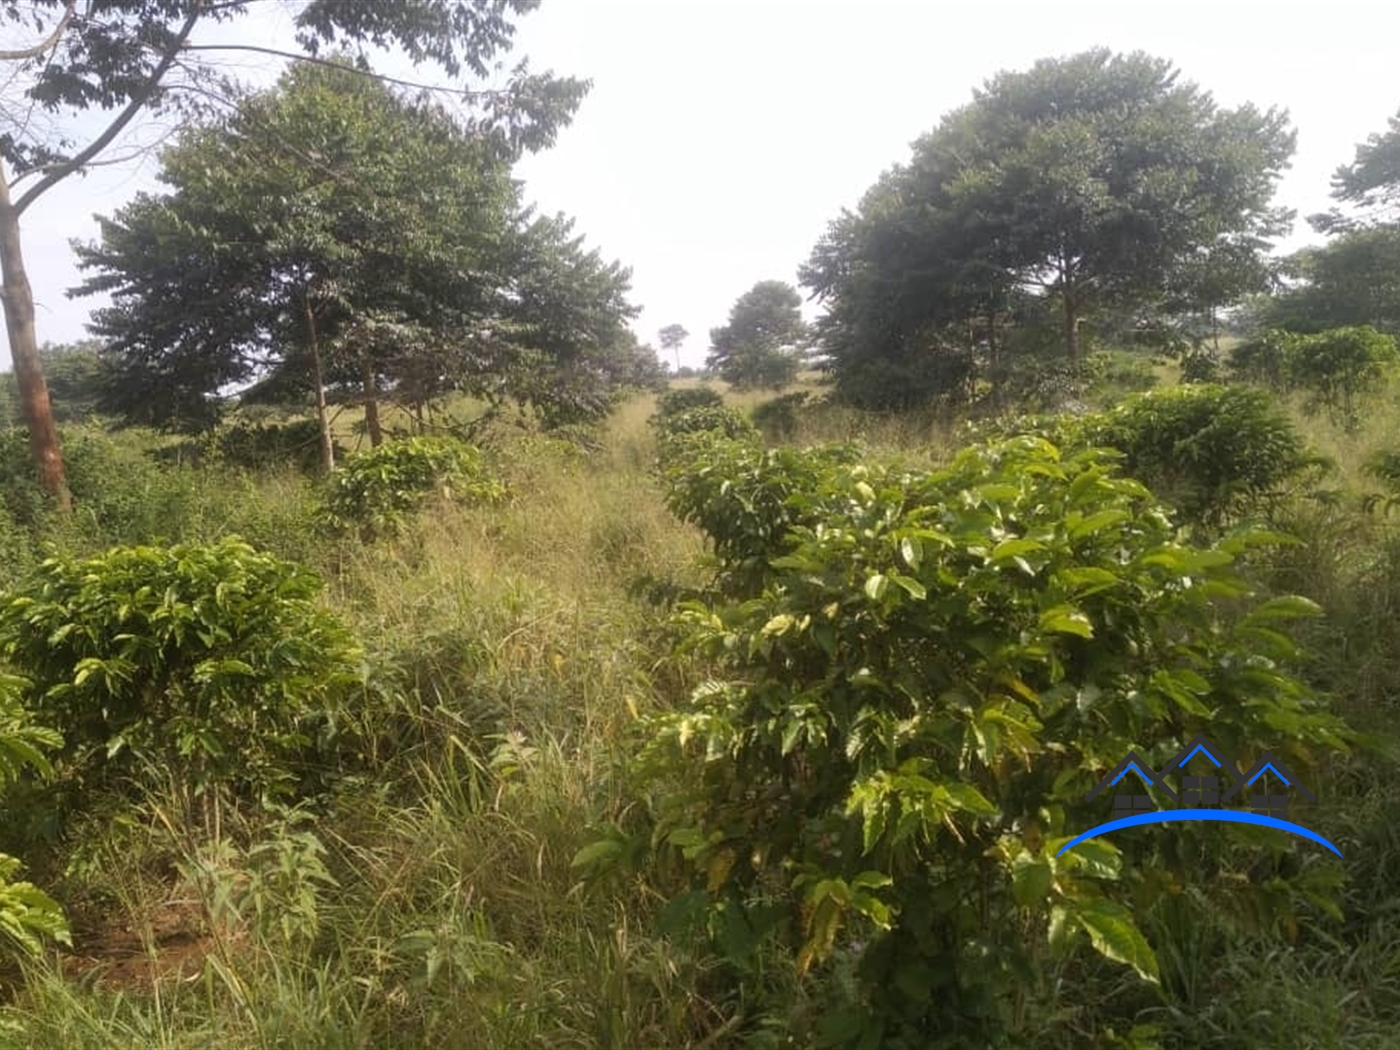 Agricultural Land for sale in Katungo Nakasongola